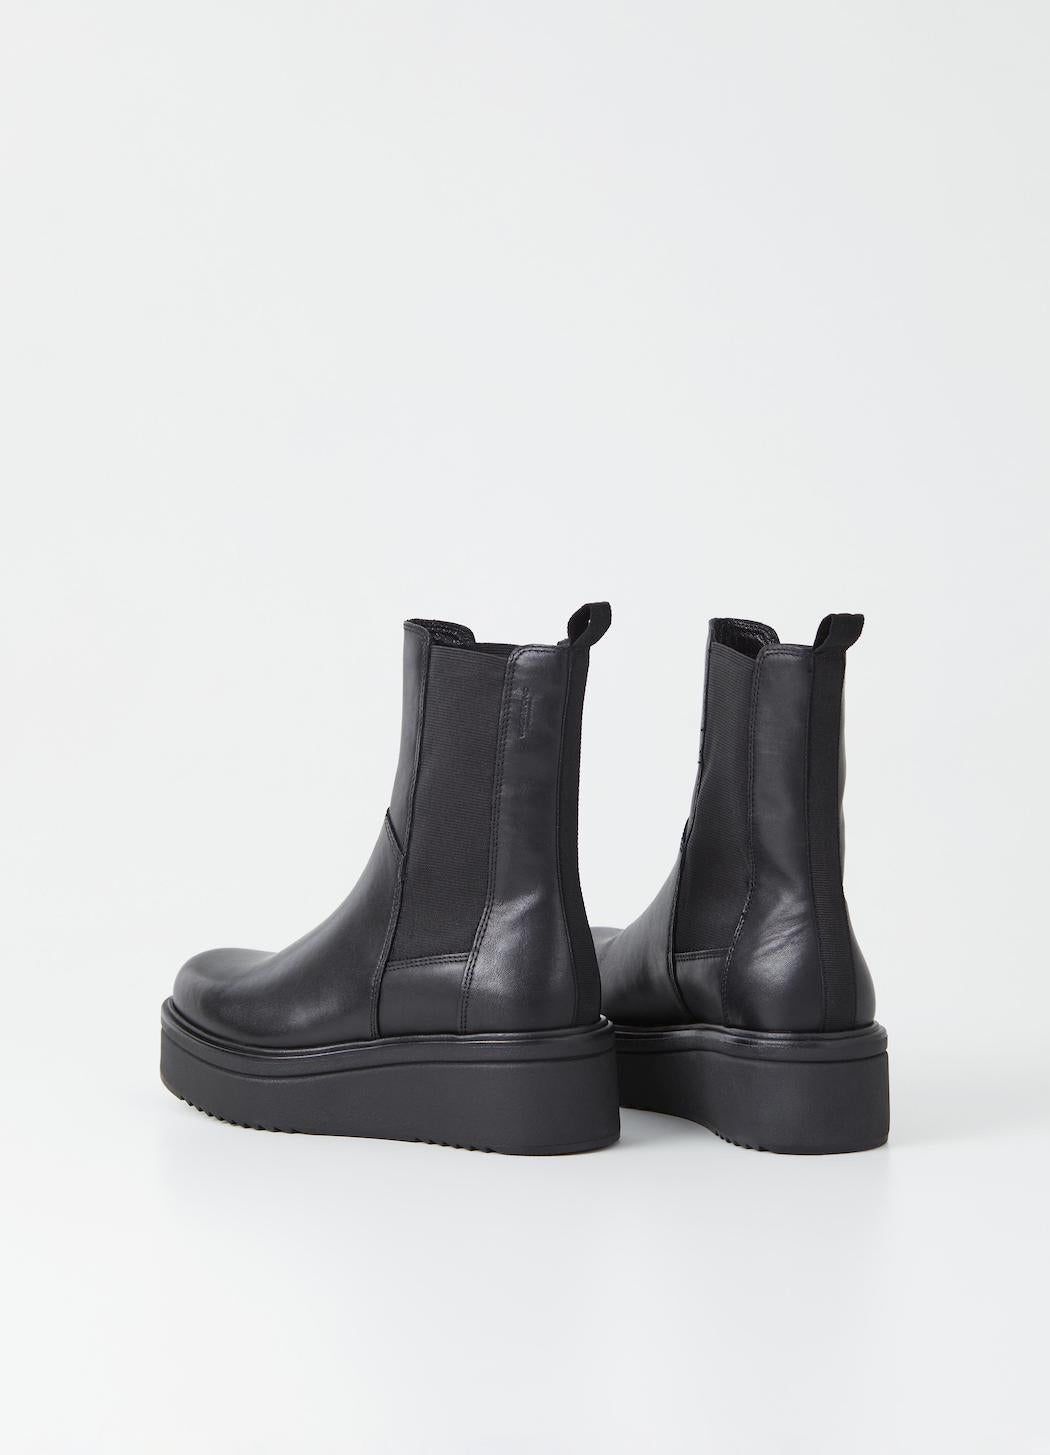 Vagabond Tara boots cult favorites black leather chunky sole | Pipe and ...